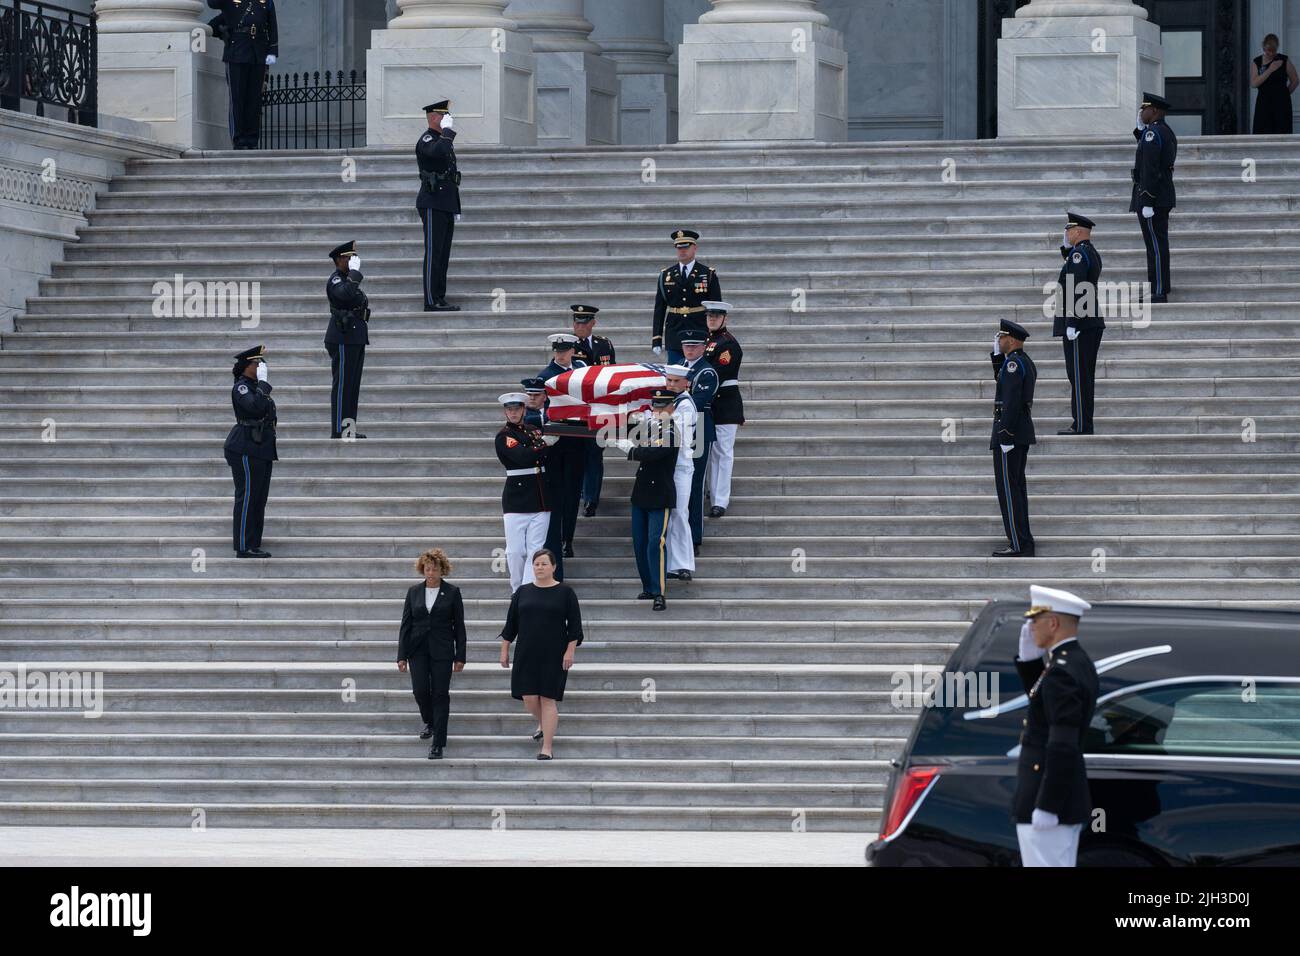 Washington DC, USA. 14th July, 2022. The casket of Marine Chief Warrant Officer 4 Hershel Woodrow “Woody” Williams, the last surviving World War II Medal of Honor recipient, is carried out of the Rotunda of the US Capitol, in Washington, DC, USA, 14 July 2022. The Marine Corps veteran, who died June 29th, was awarded the nation's highest award for his actions on Iwo Jima. (Photo by Pool/Sipa USA) Credit: Sipa USA/Alamy Live News Stock Photo